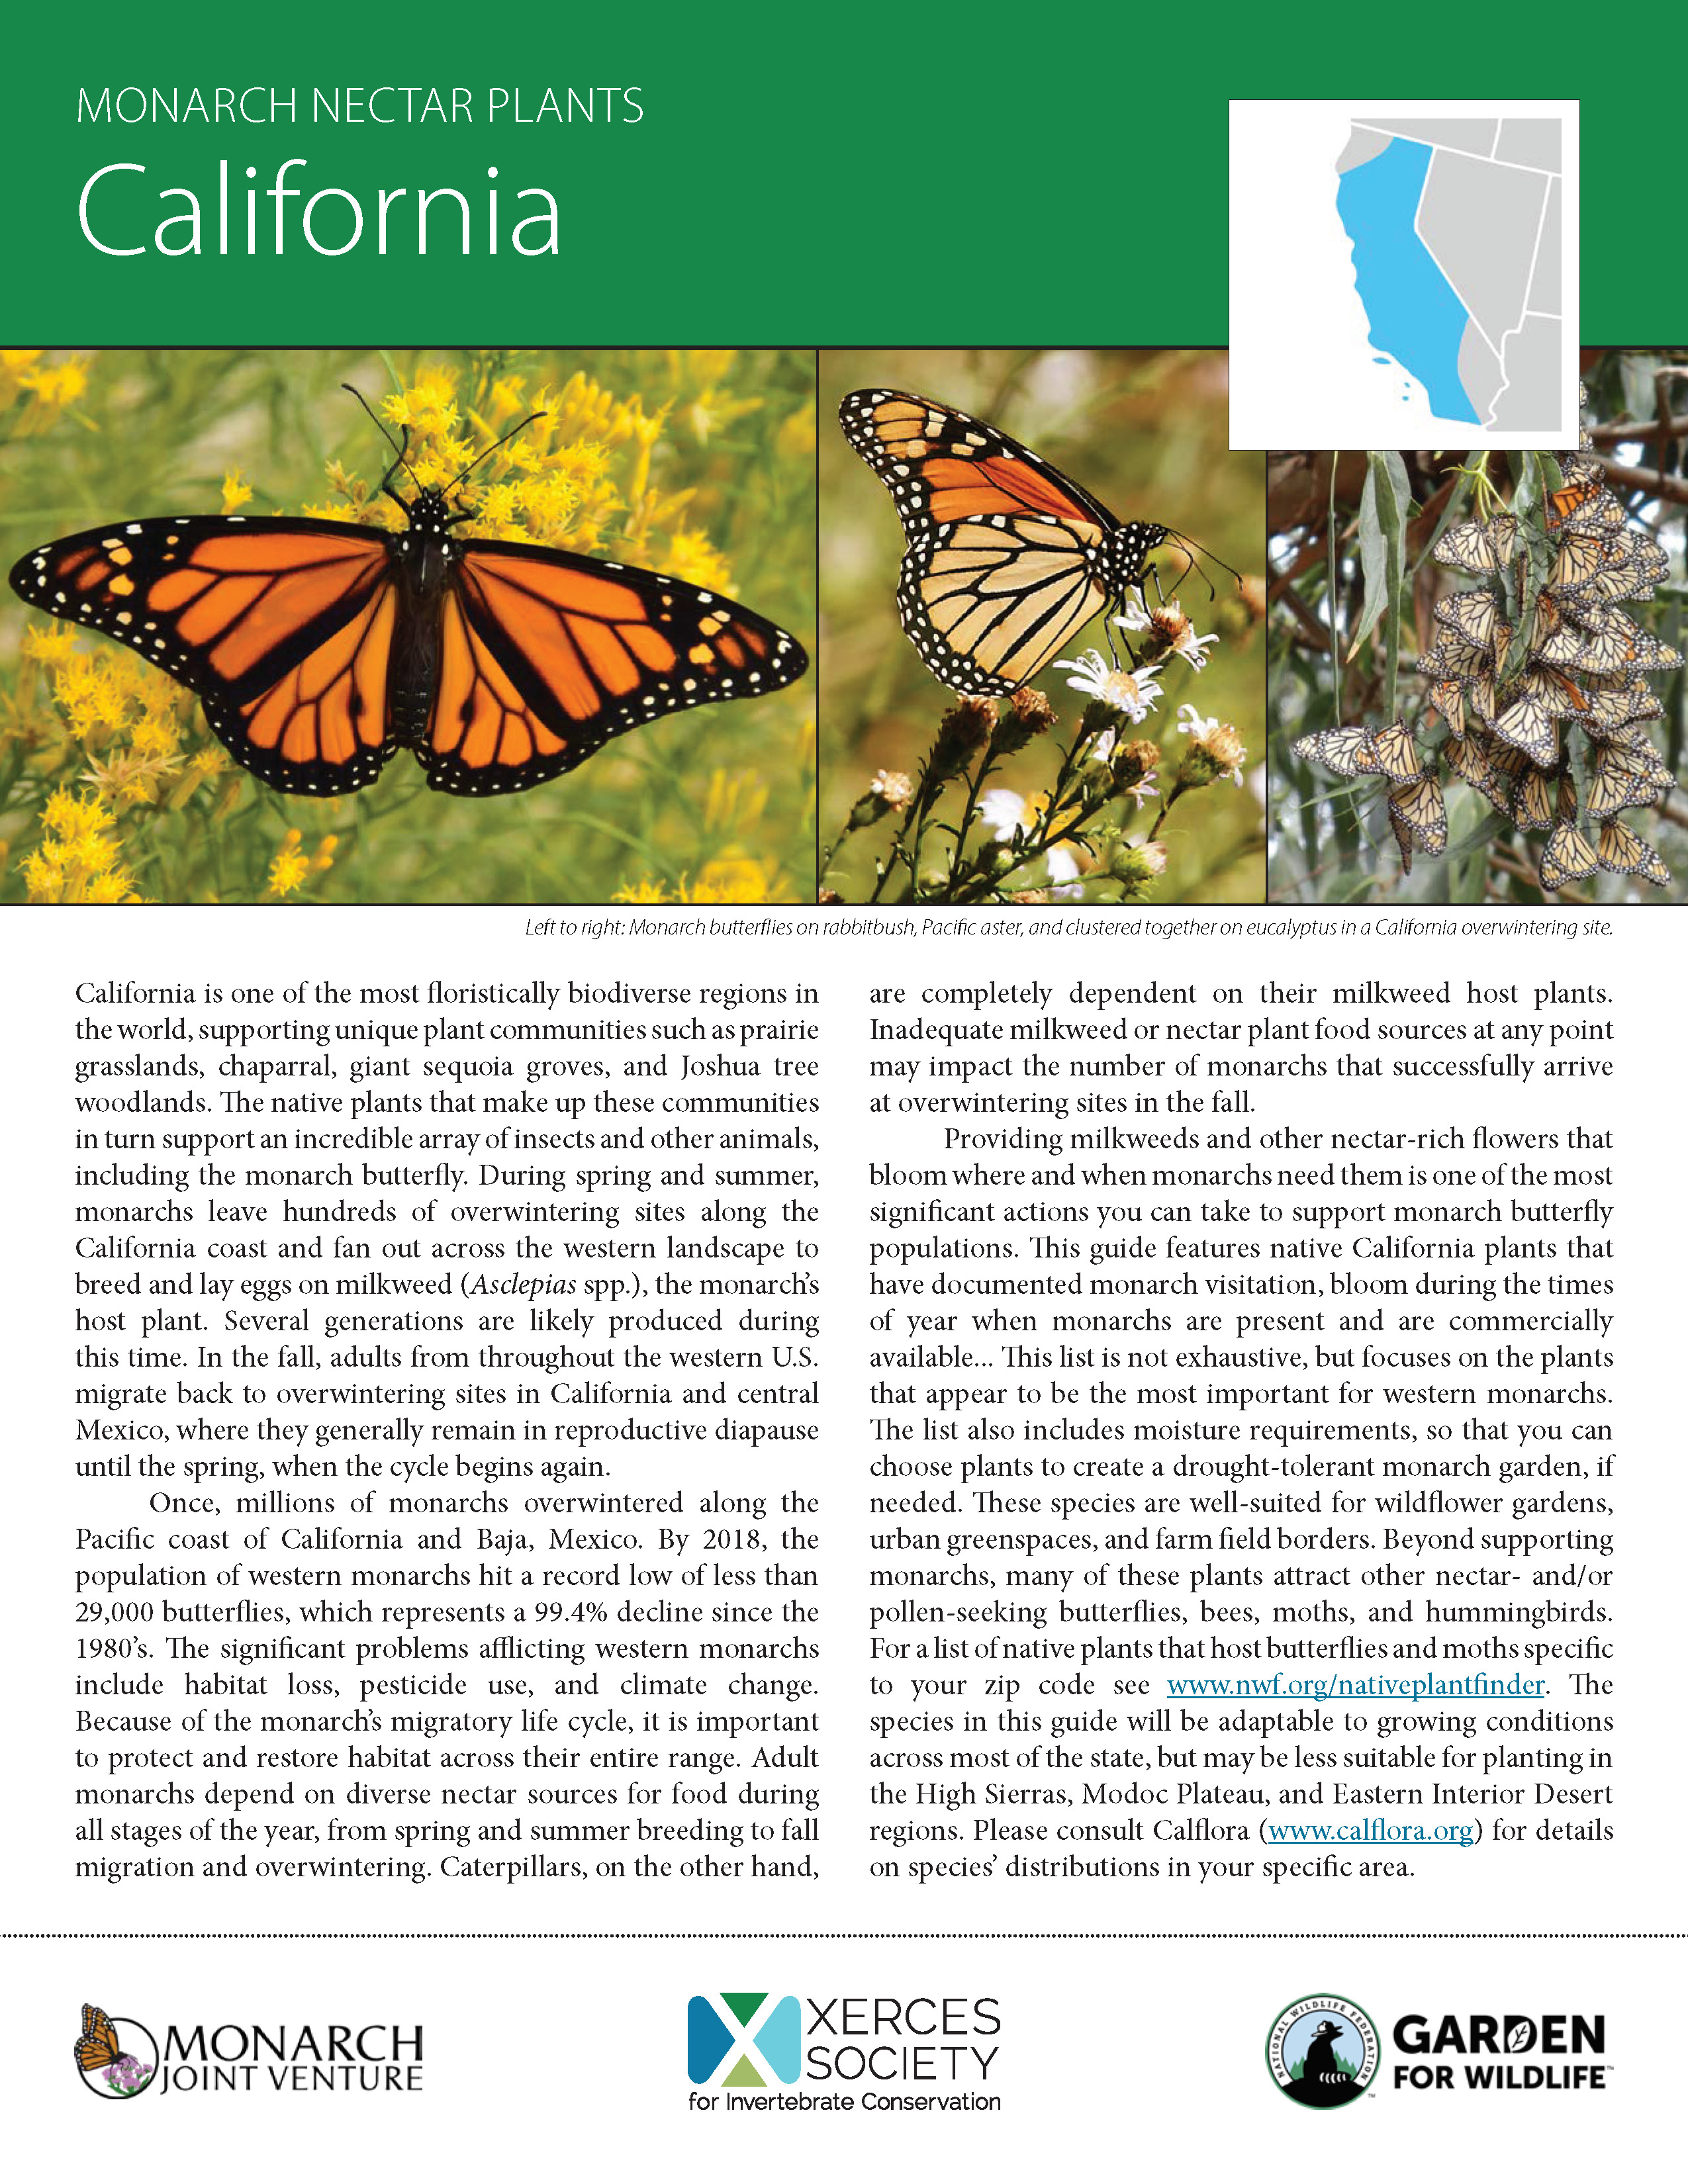 The Monarch Butterfly Genome Yields Insights into Long-Distance